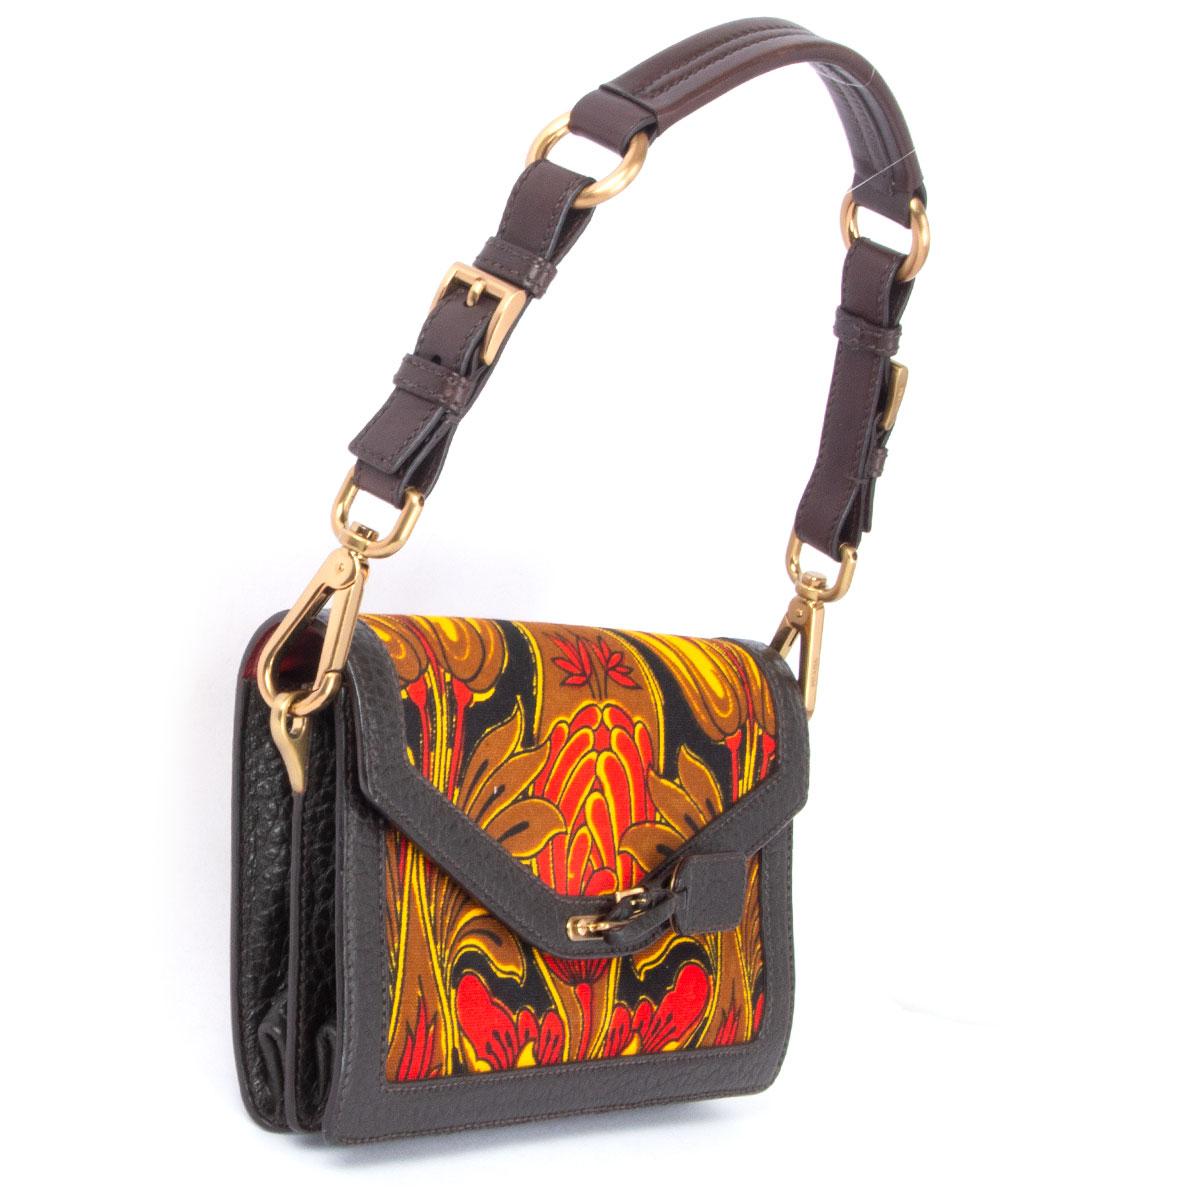 100% authentic Prada shoulder bag in brown, red, yellow and black floral printed canvas featuring espresso brown trimmings and shoulder-strap. Has two decorative buckles on the back. Opens with a magnetic button under the flap and is lined divided